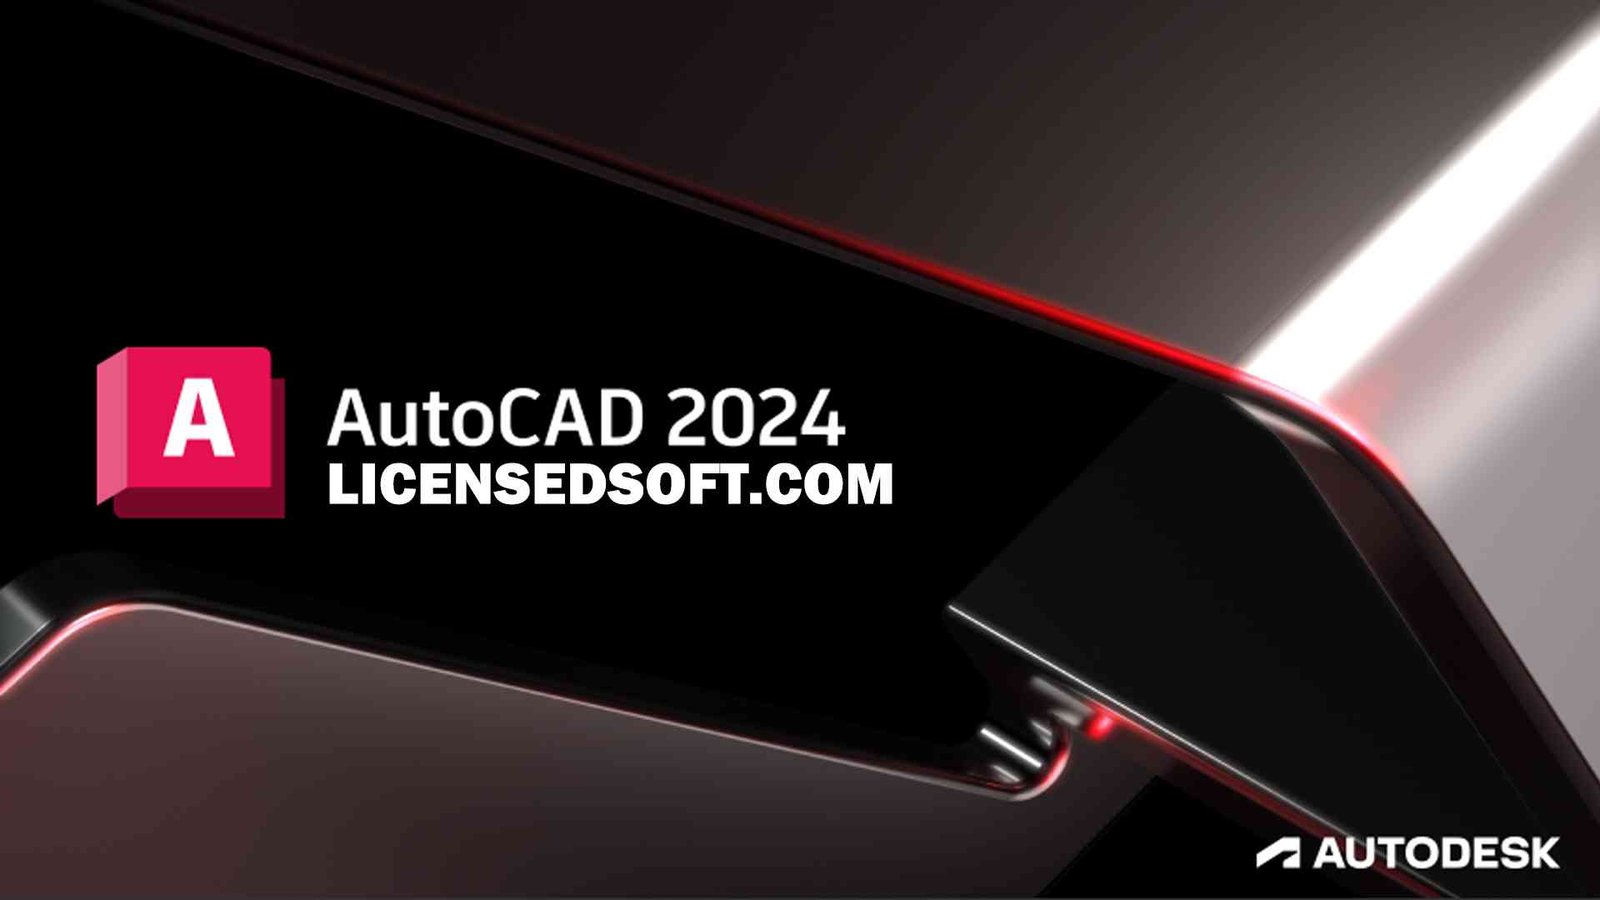 Autodesk AutoCAD 2024 Cover by LicensedSoft